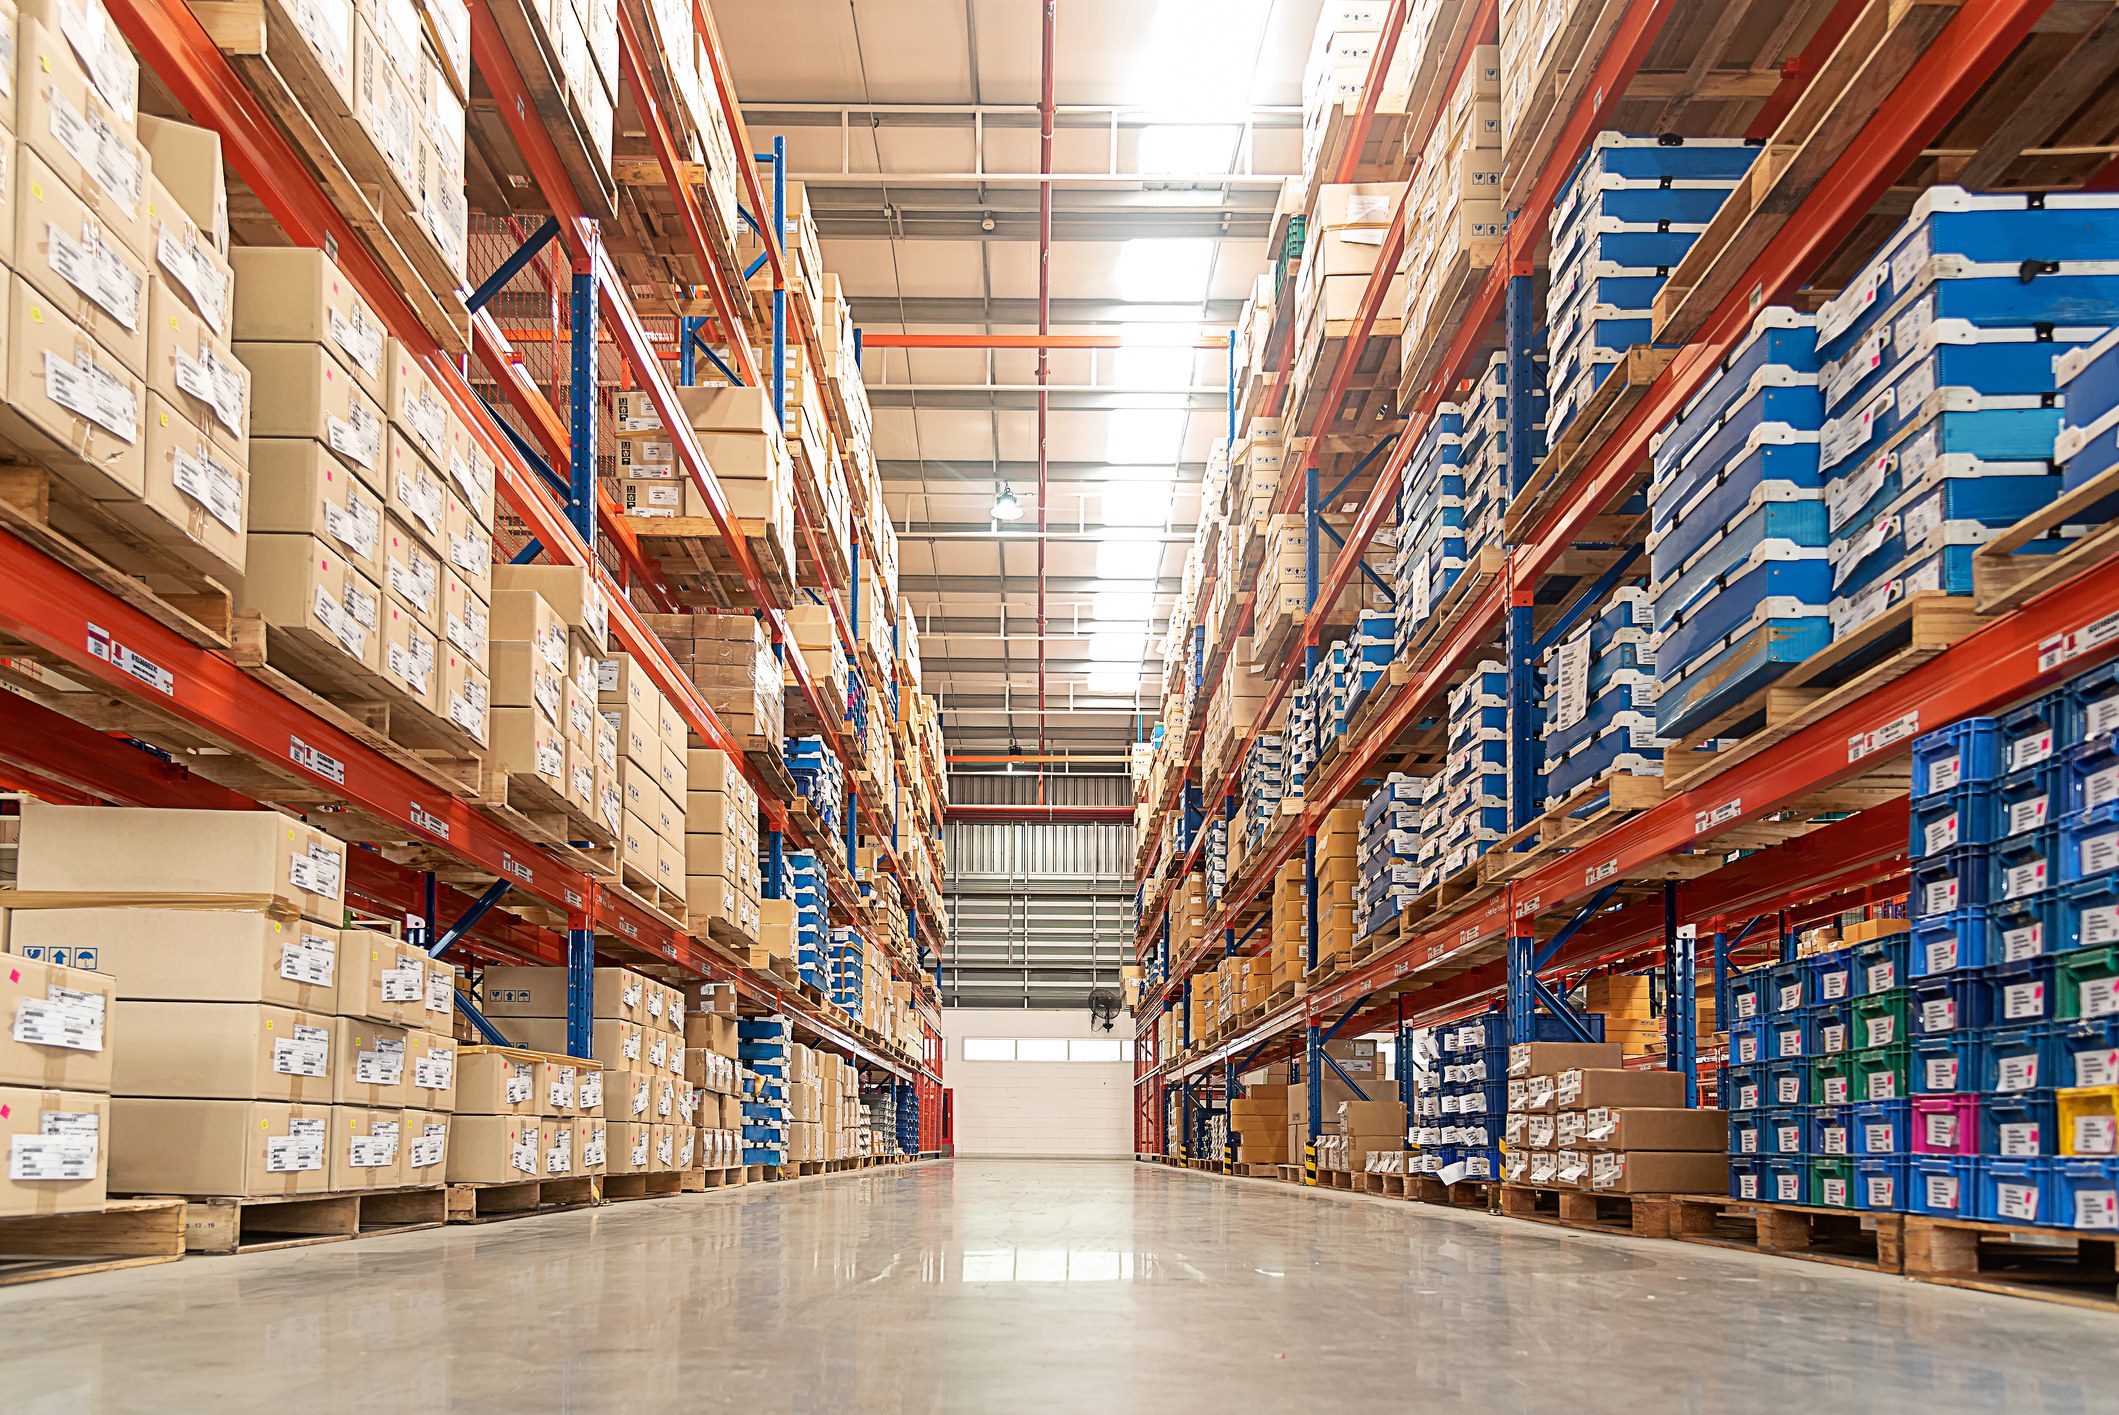 Indian Warehouse Market Forecast Report Till 2026 | Industry Growth, Leading Companies Analysis, Trends, Outlook, and Business Opportunity